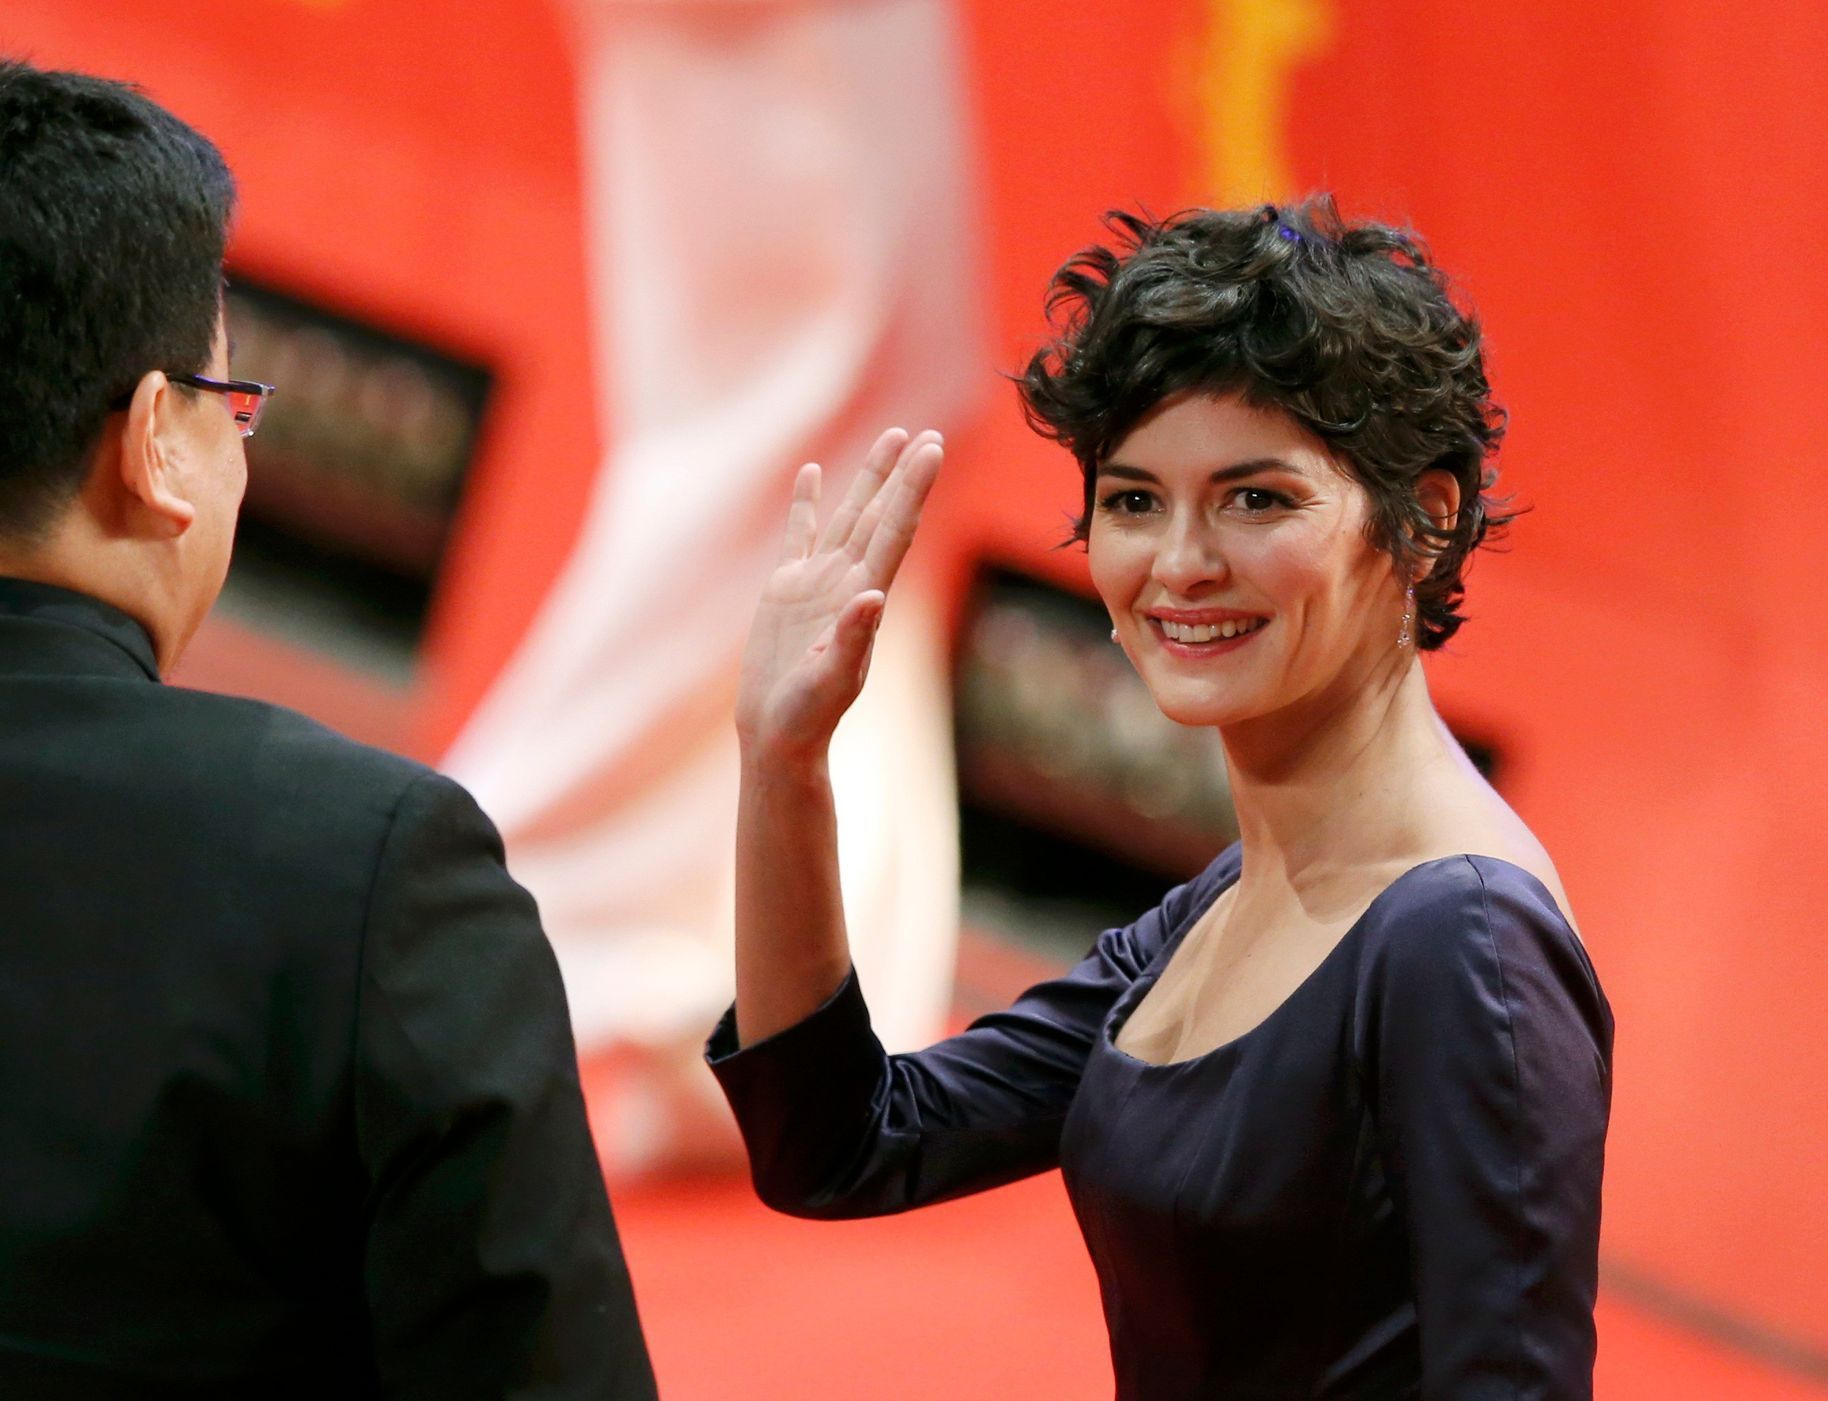 International jury member French actress Tautou arrives for screening during opening gala of 65th Berlinale International Film Festival in Berlin